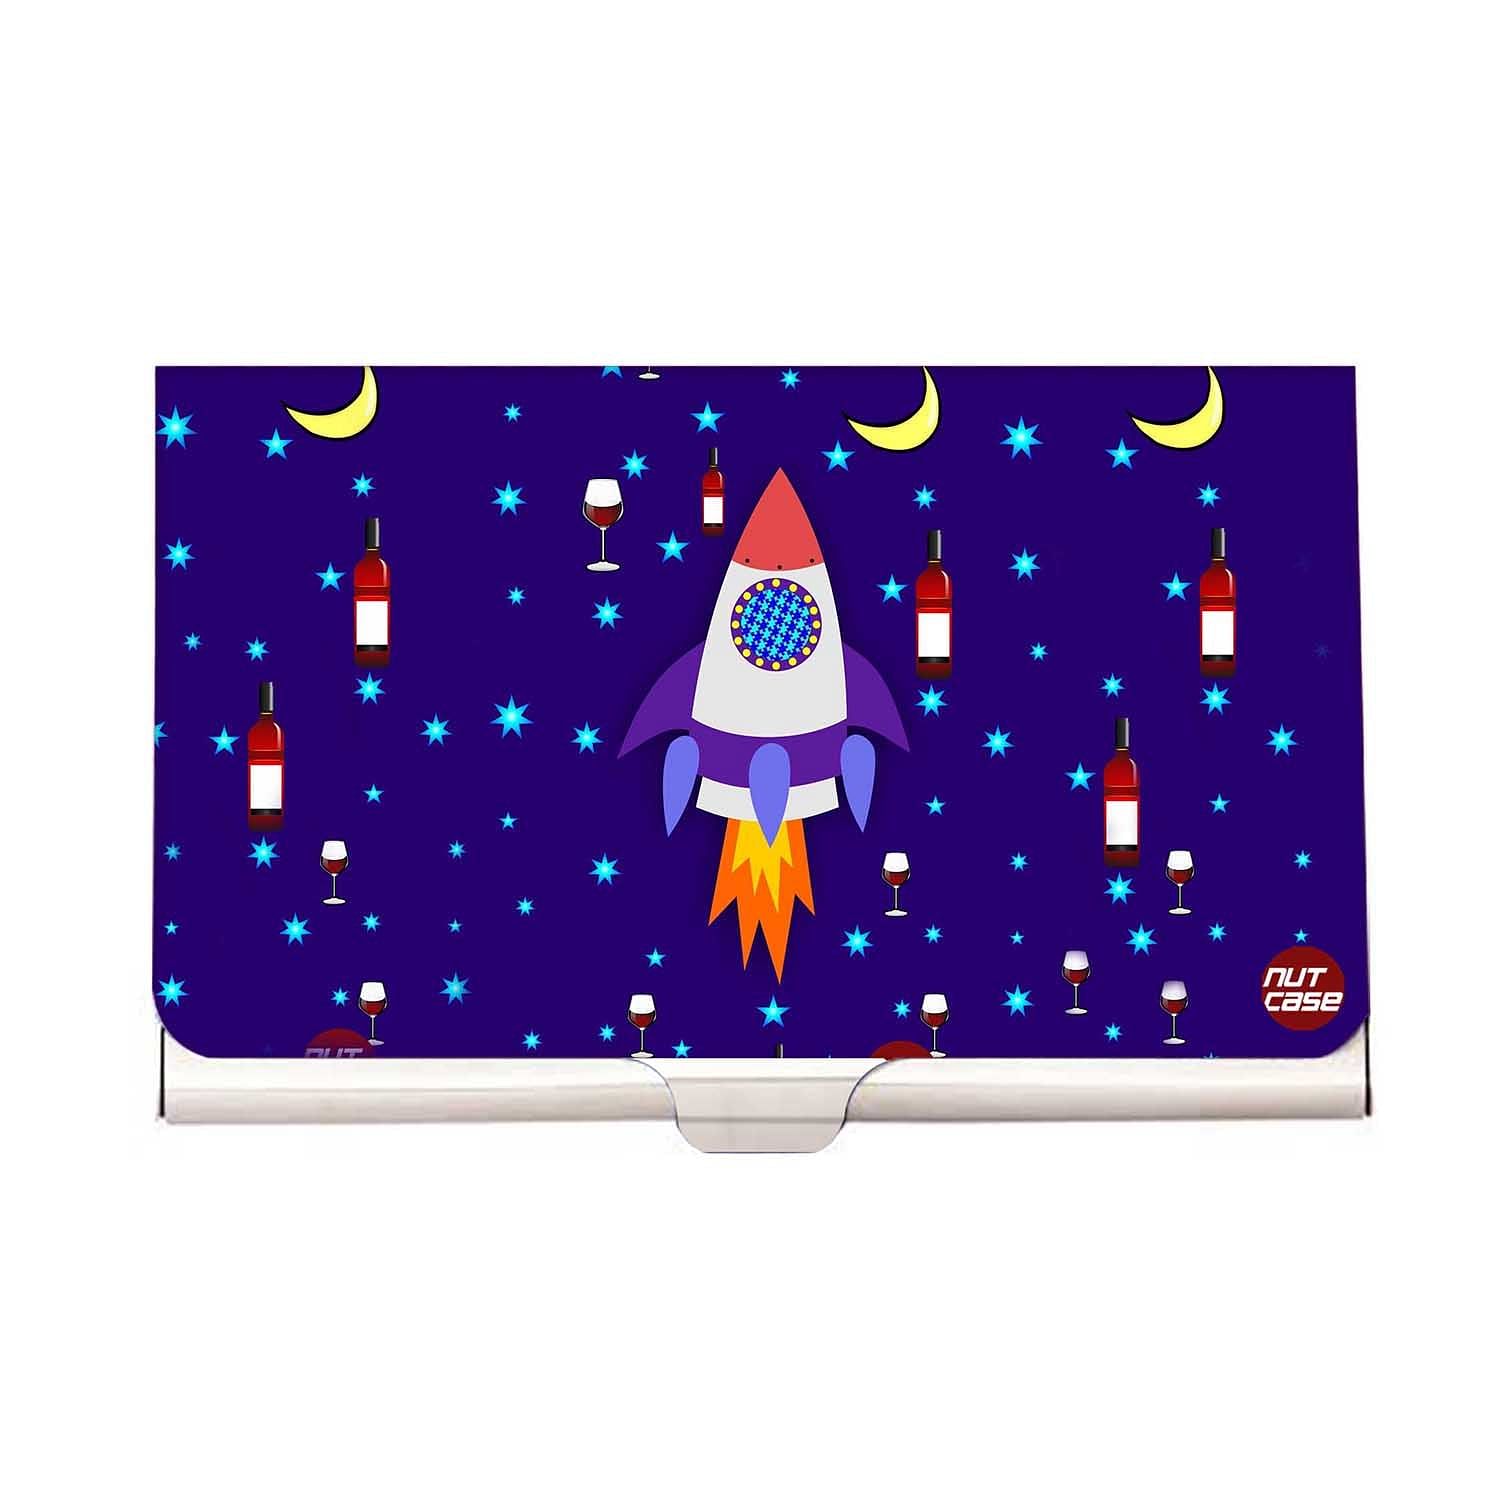 Designer Visiting Card Holder Nutcase - Lets go to Space for Tonight party Nutcase